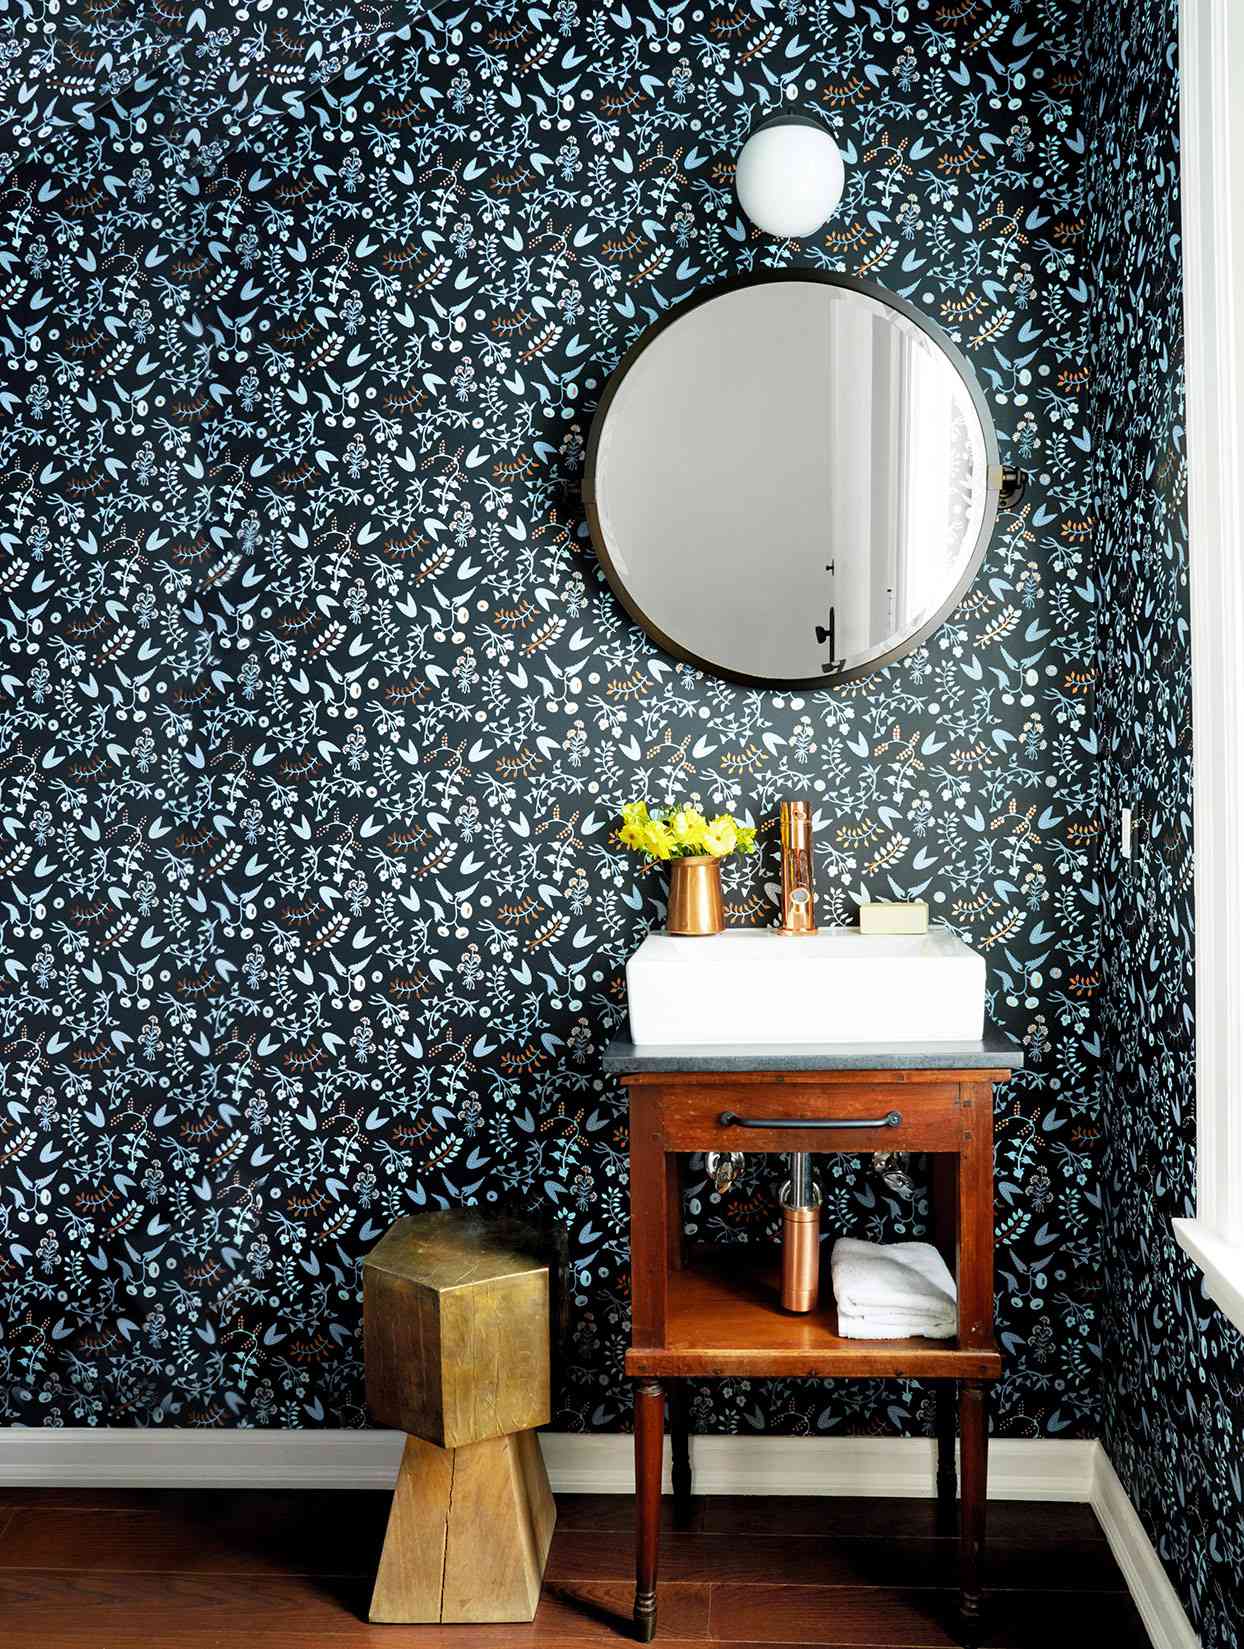 Corner of room with floral wallpaper